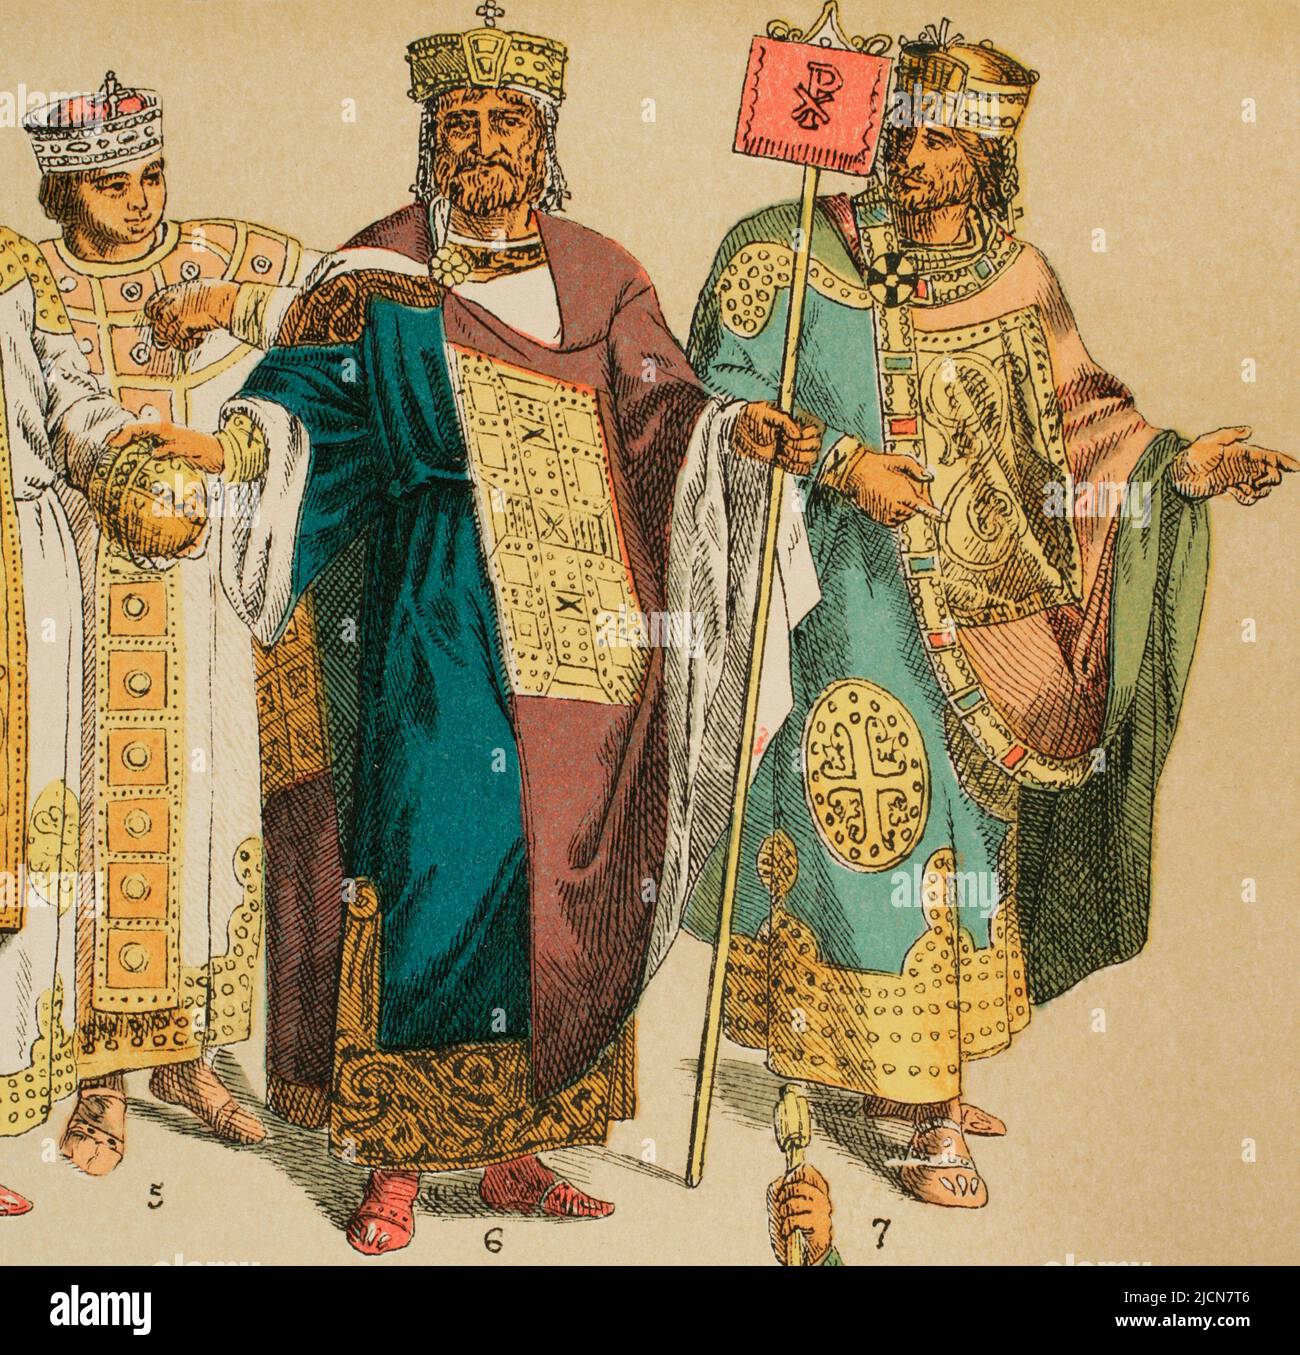 Byzantines (700-1000). From left to right, 5: Royal suit. Dalmatic. Silk cloth. Sceptre, 6 and 7: Royal suit. Dalmatic and second robe. Chromolithography. 'Historia Universal' (Universal History), by César Cantú. Volume IV. Published in Barcelona, 1881. Stock Photo